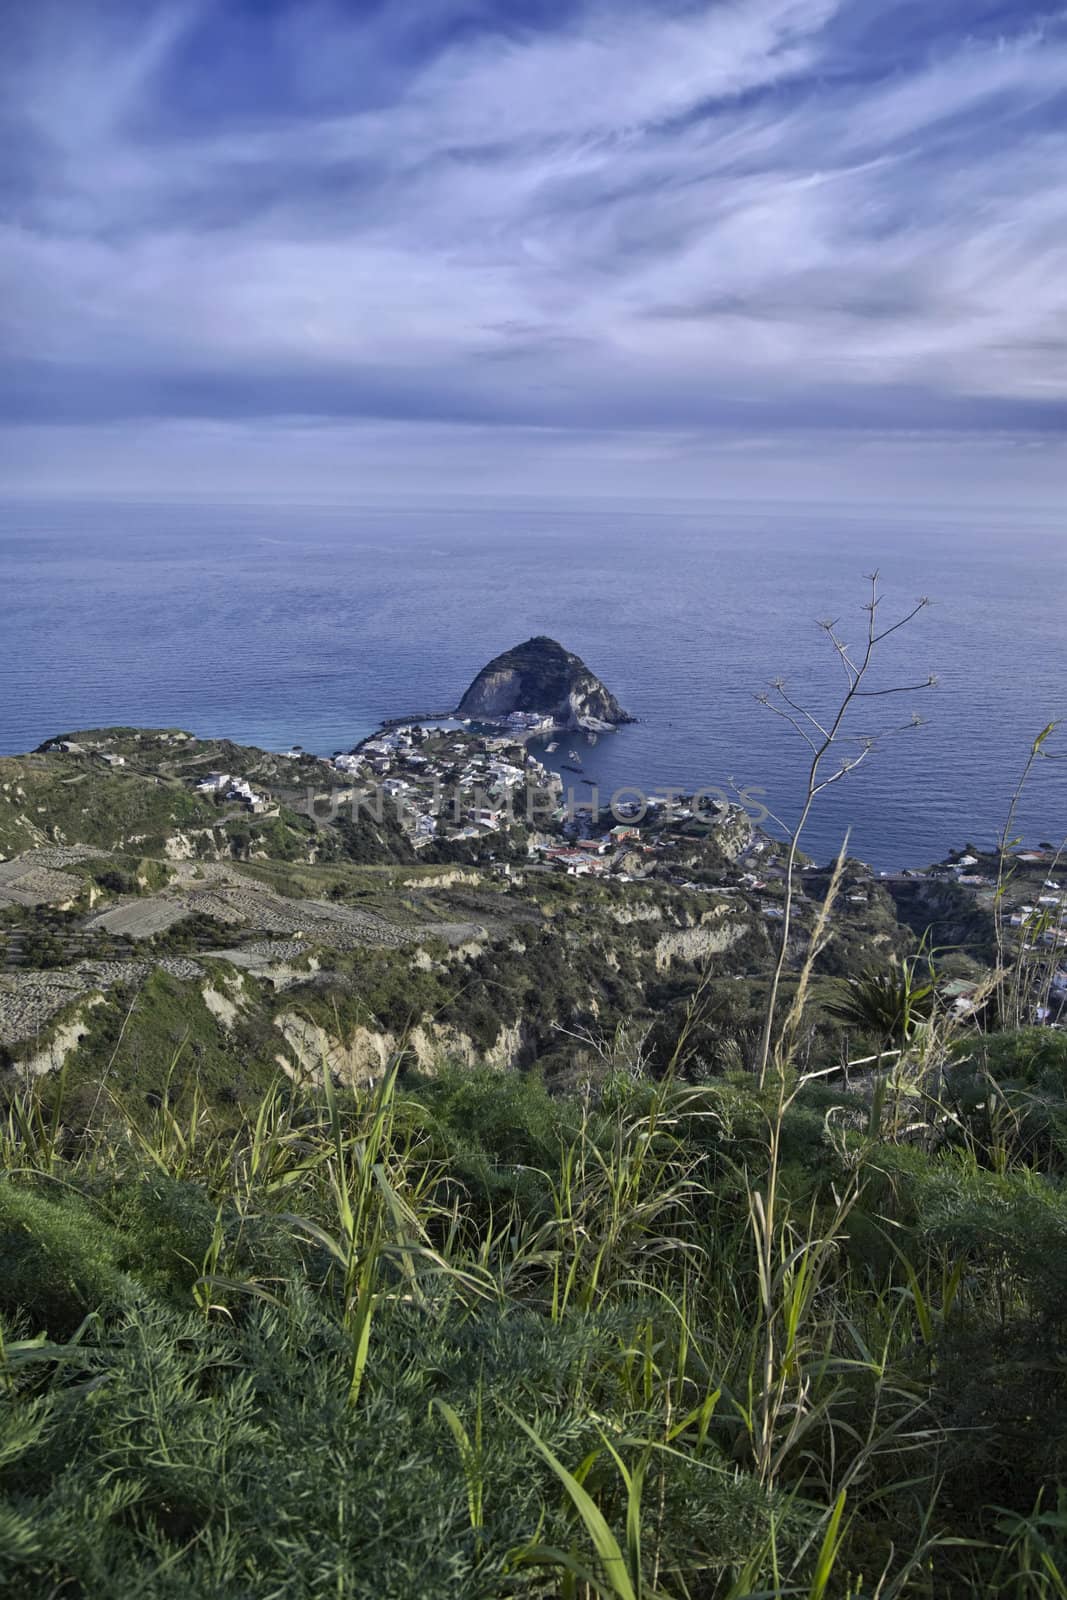 ITALY, Campania, Ischia island, S.Angelo, view of S.Angelo promontory by agiampiccolo